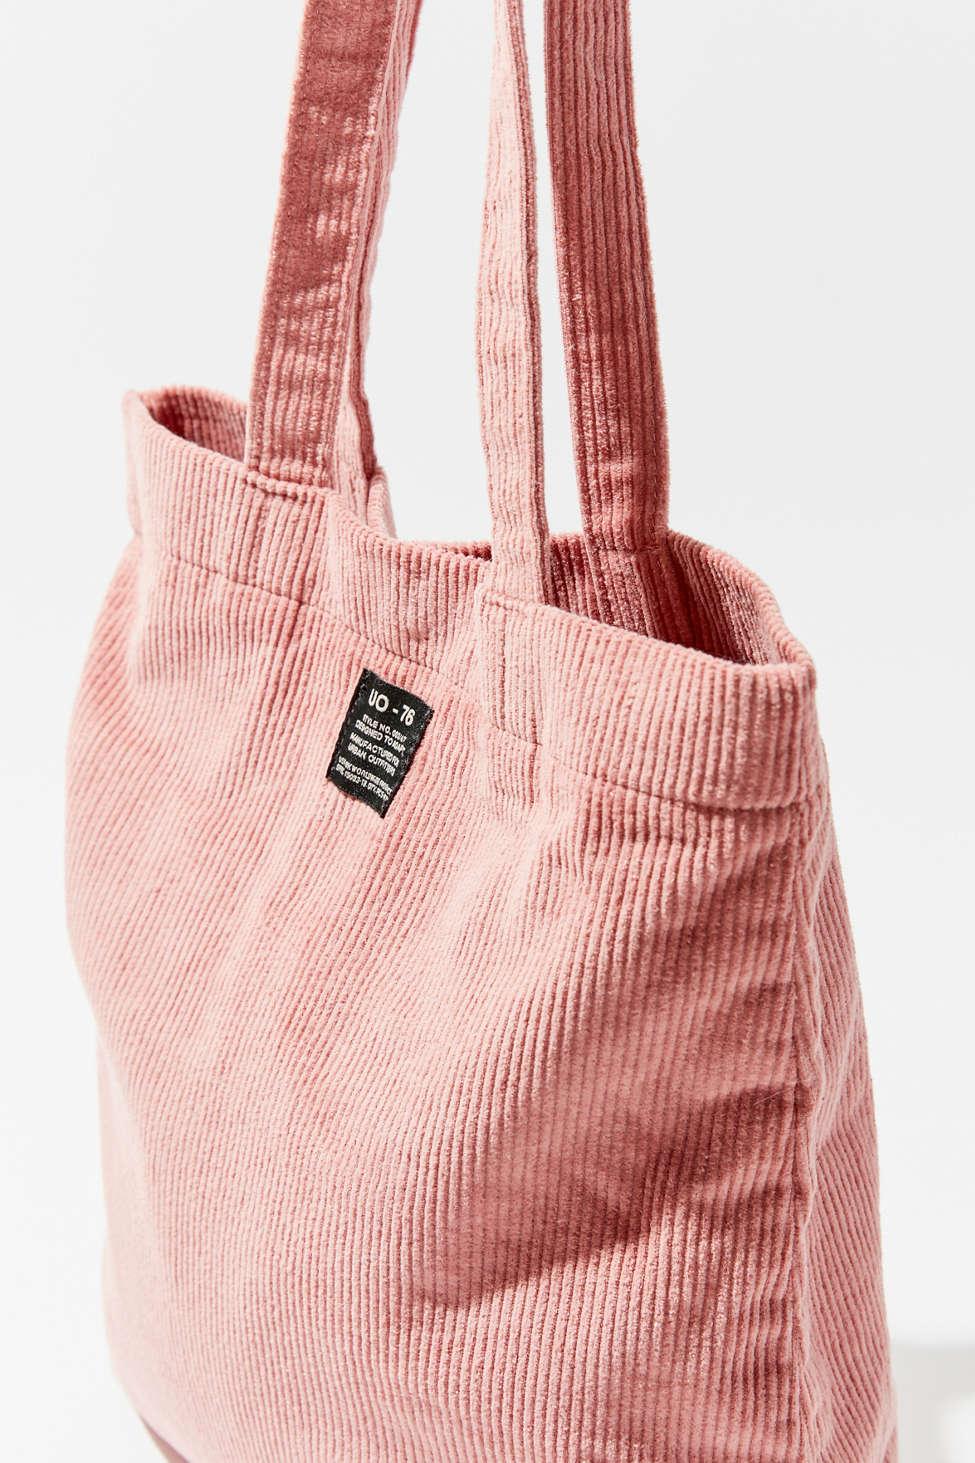 Urban Outfitters Tote Bag Online Buy, Save 46 jlcatj.gob.mx